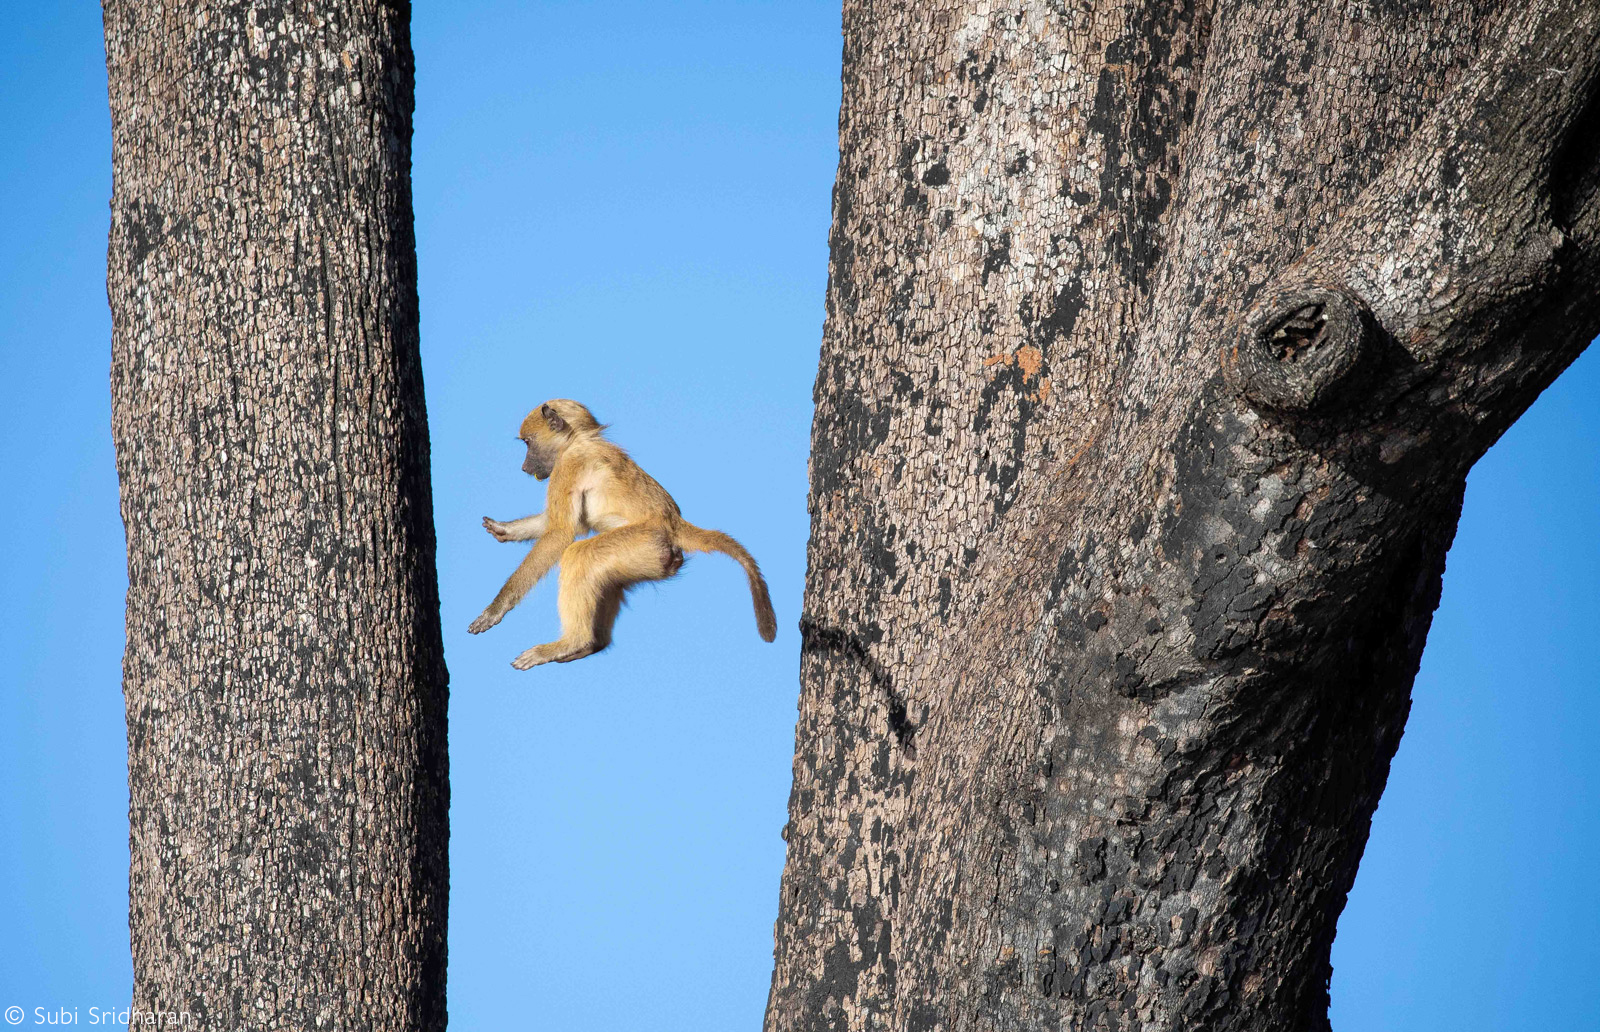 A young baboon takes a leap in a tree. Chobe National Park, Botswana © Subi Sridharan